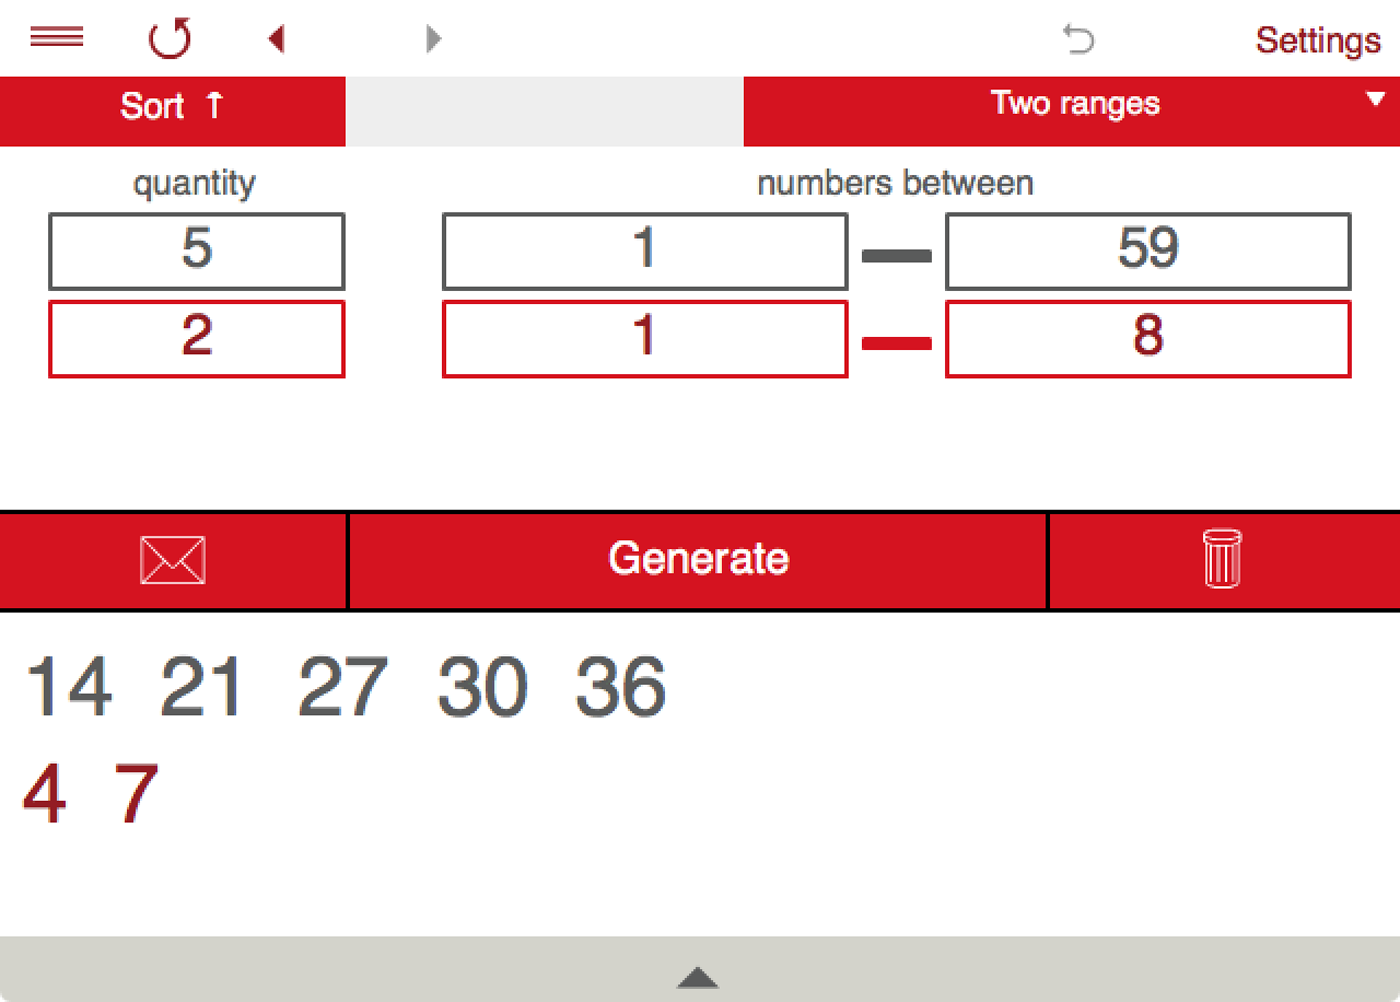 You can generate numbers in two independent ranges at a time.